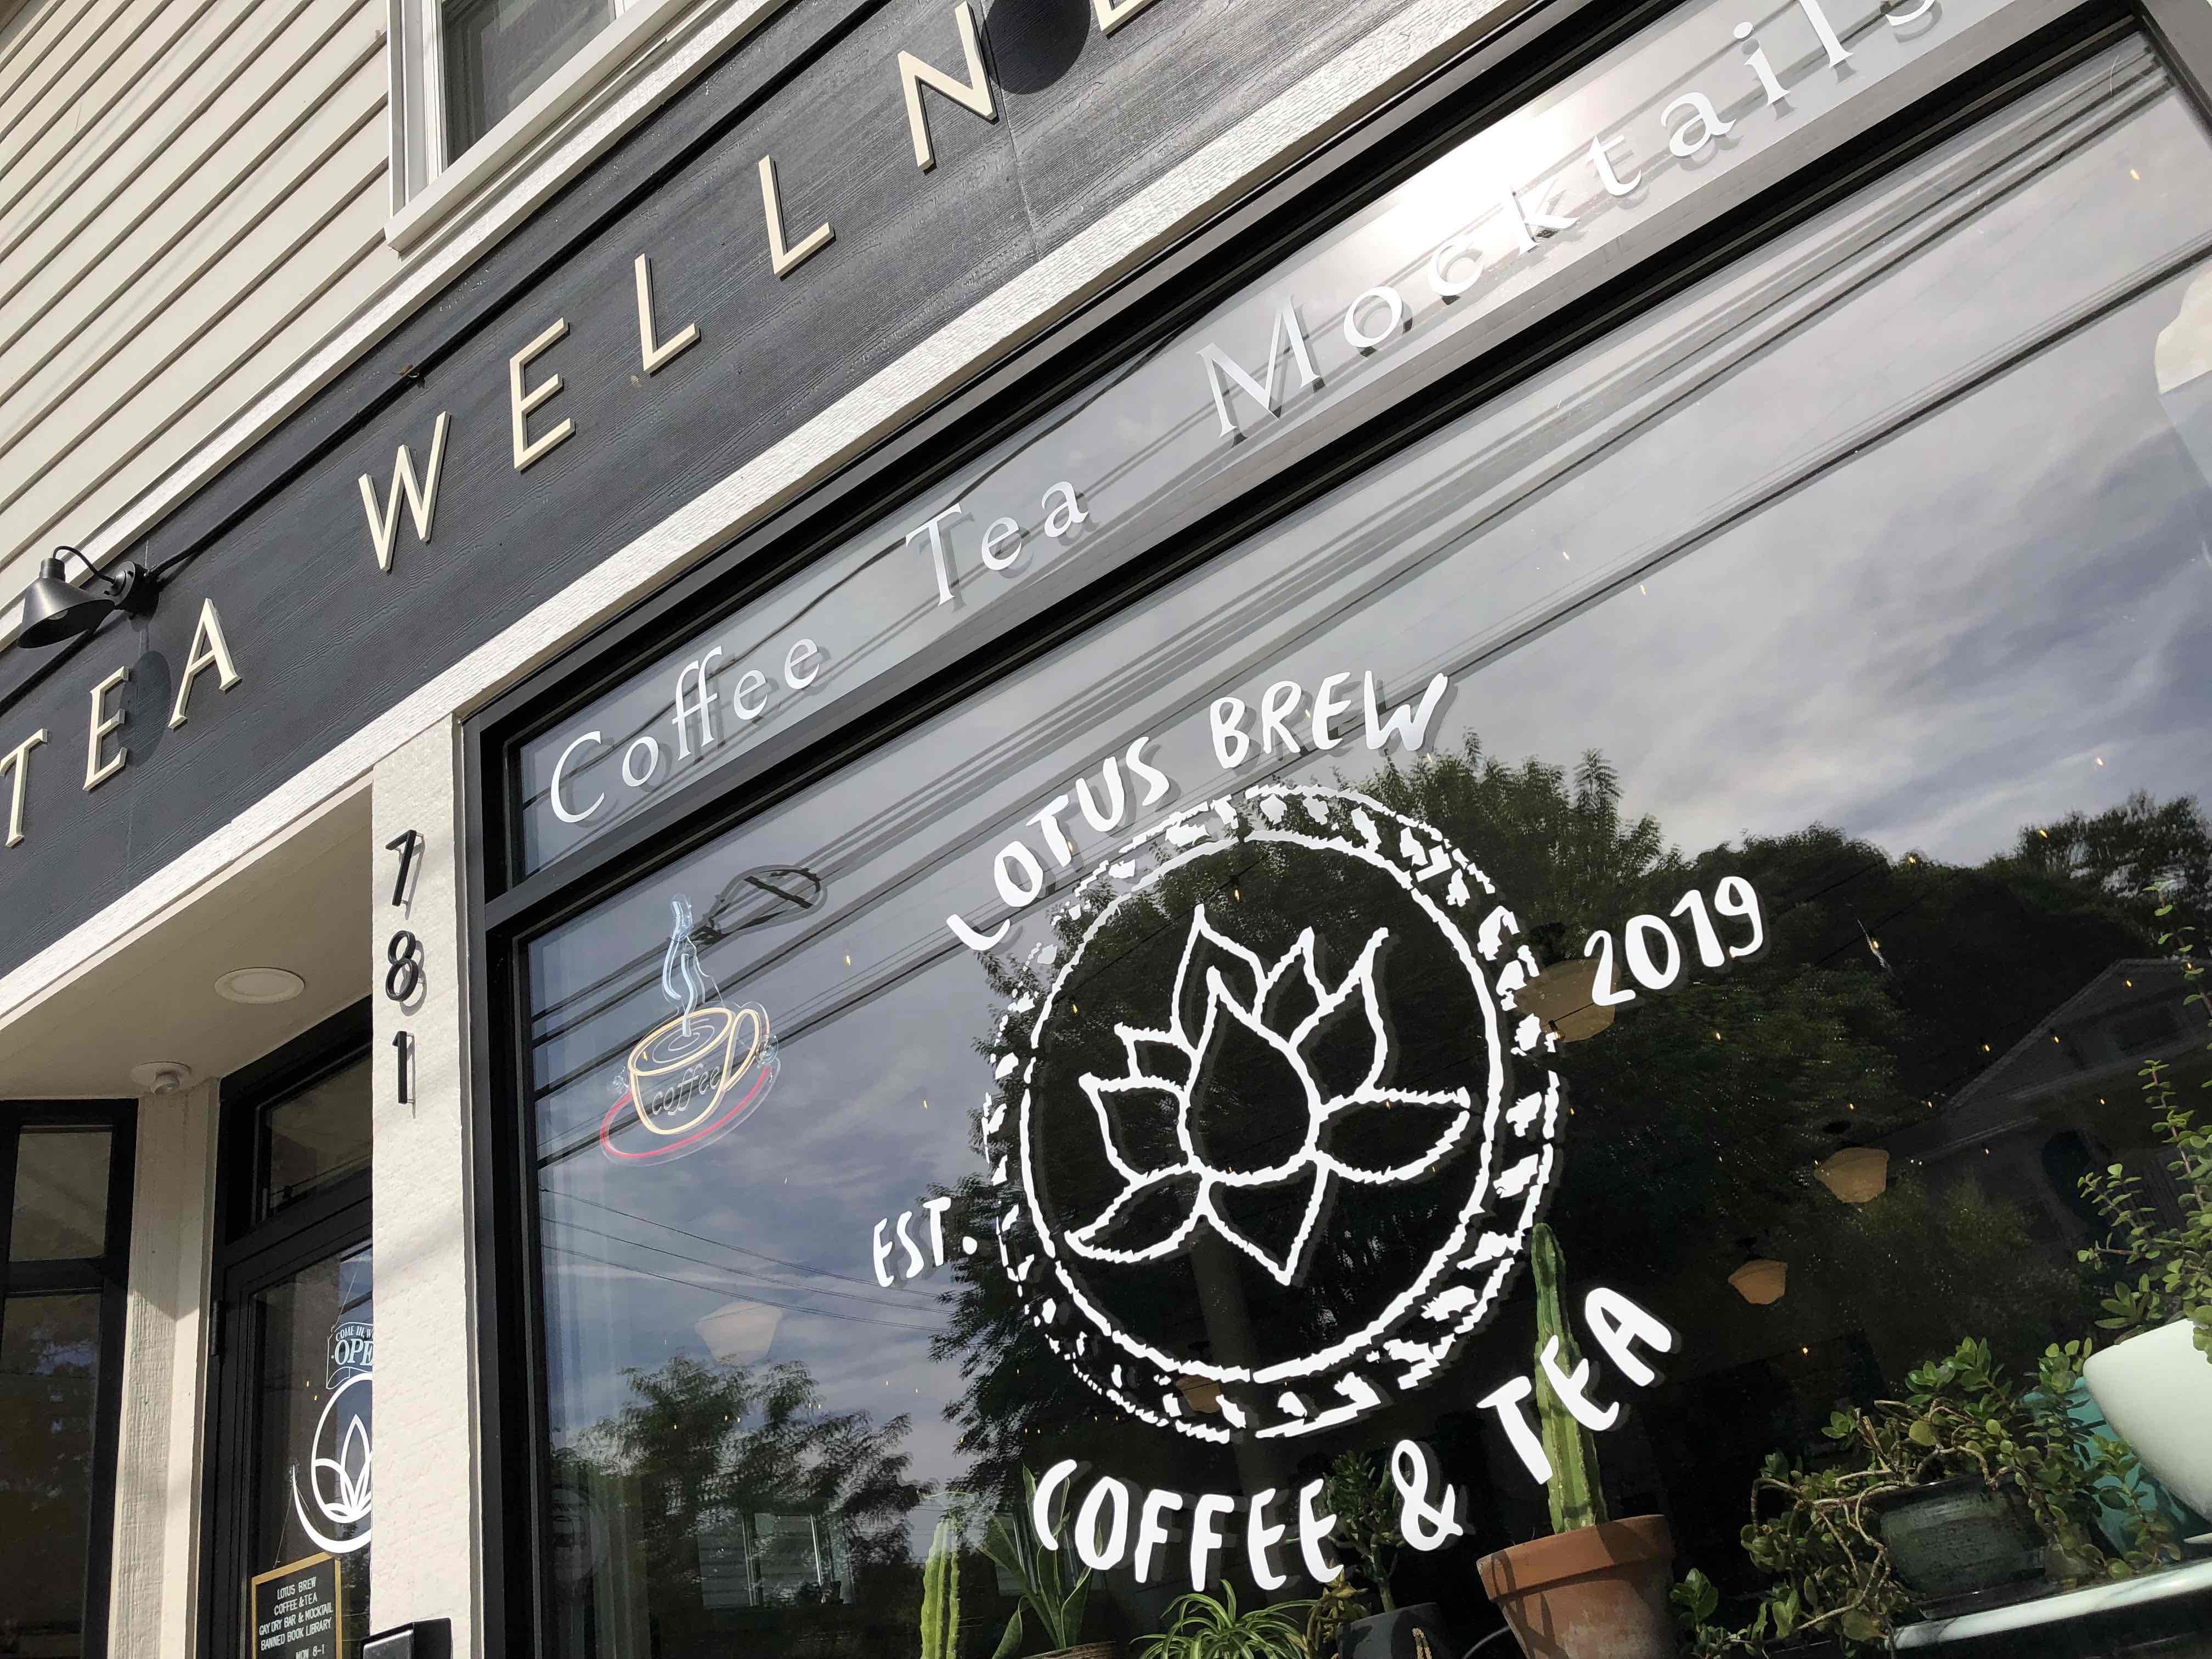 Lotus Brew Coffee & Tea Est. 2019 storefront with logo signage on the glass